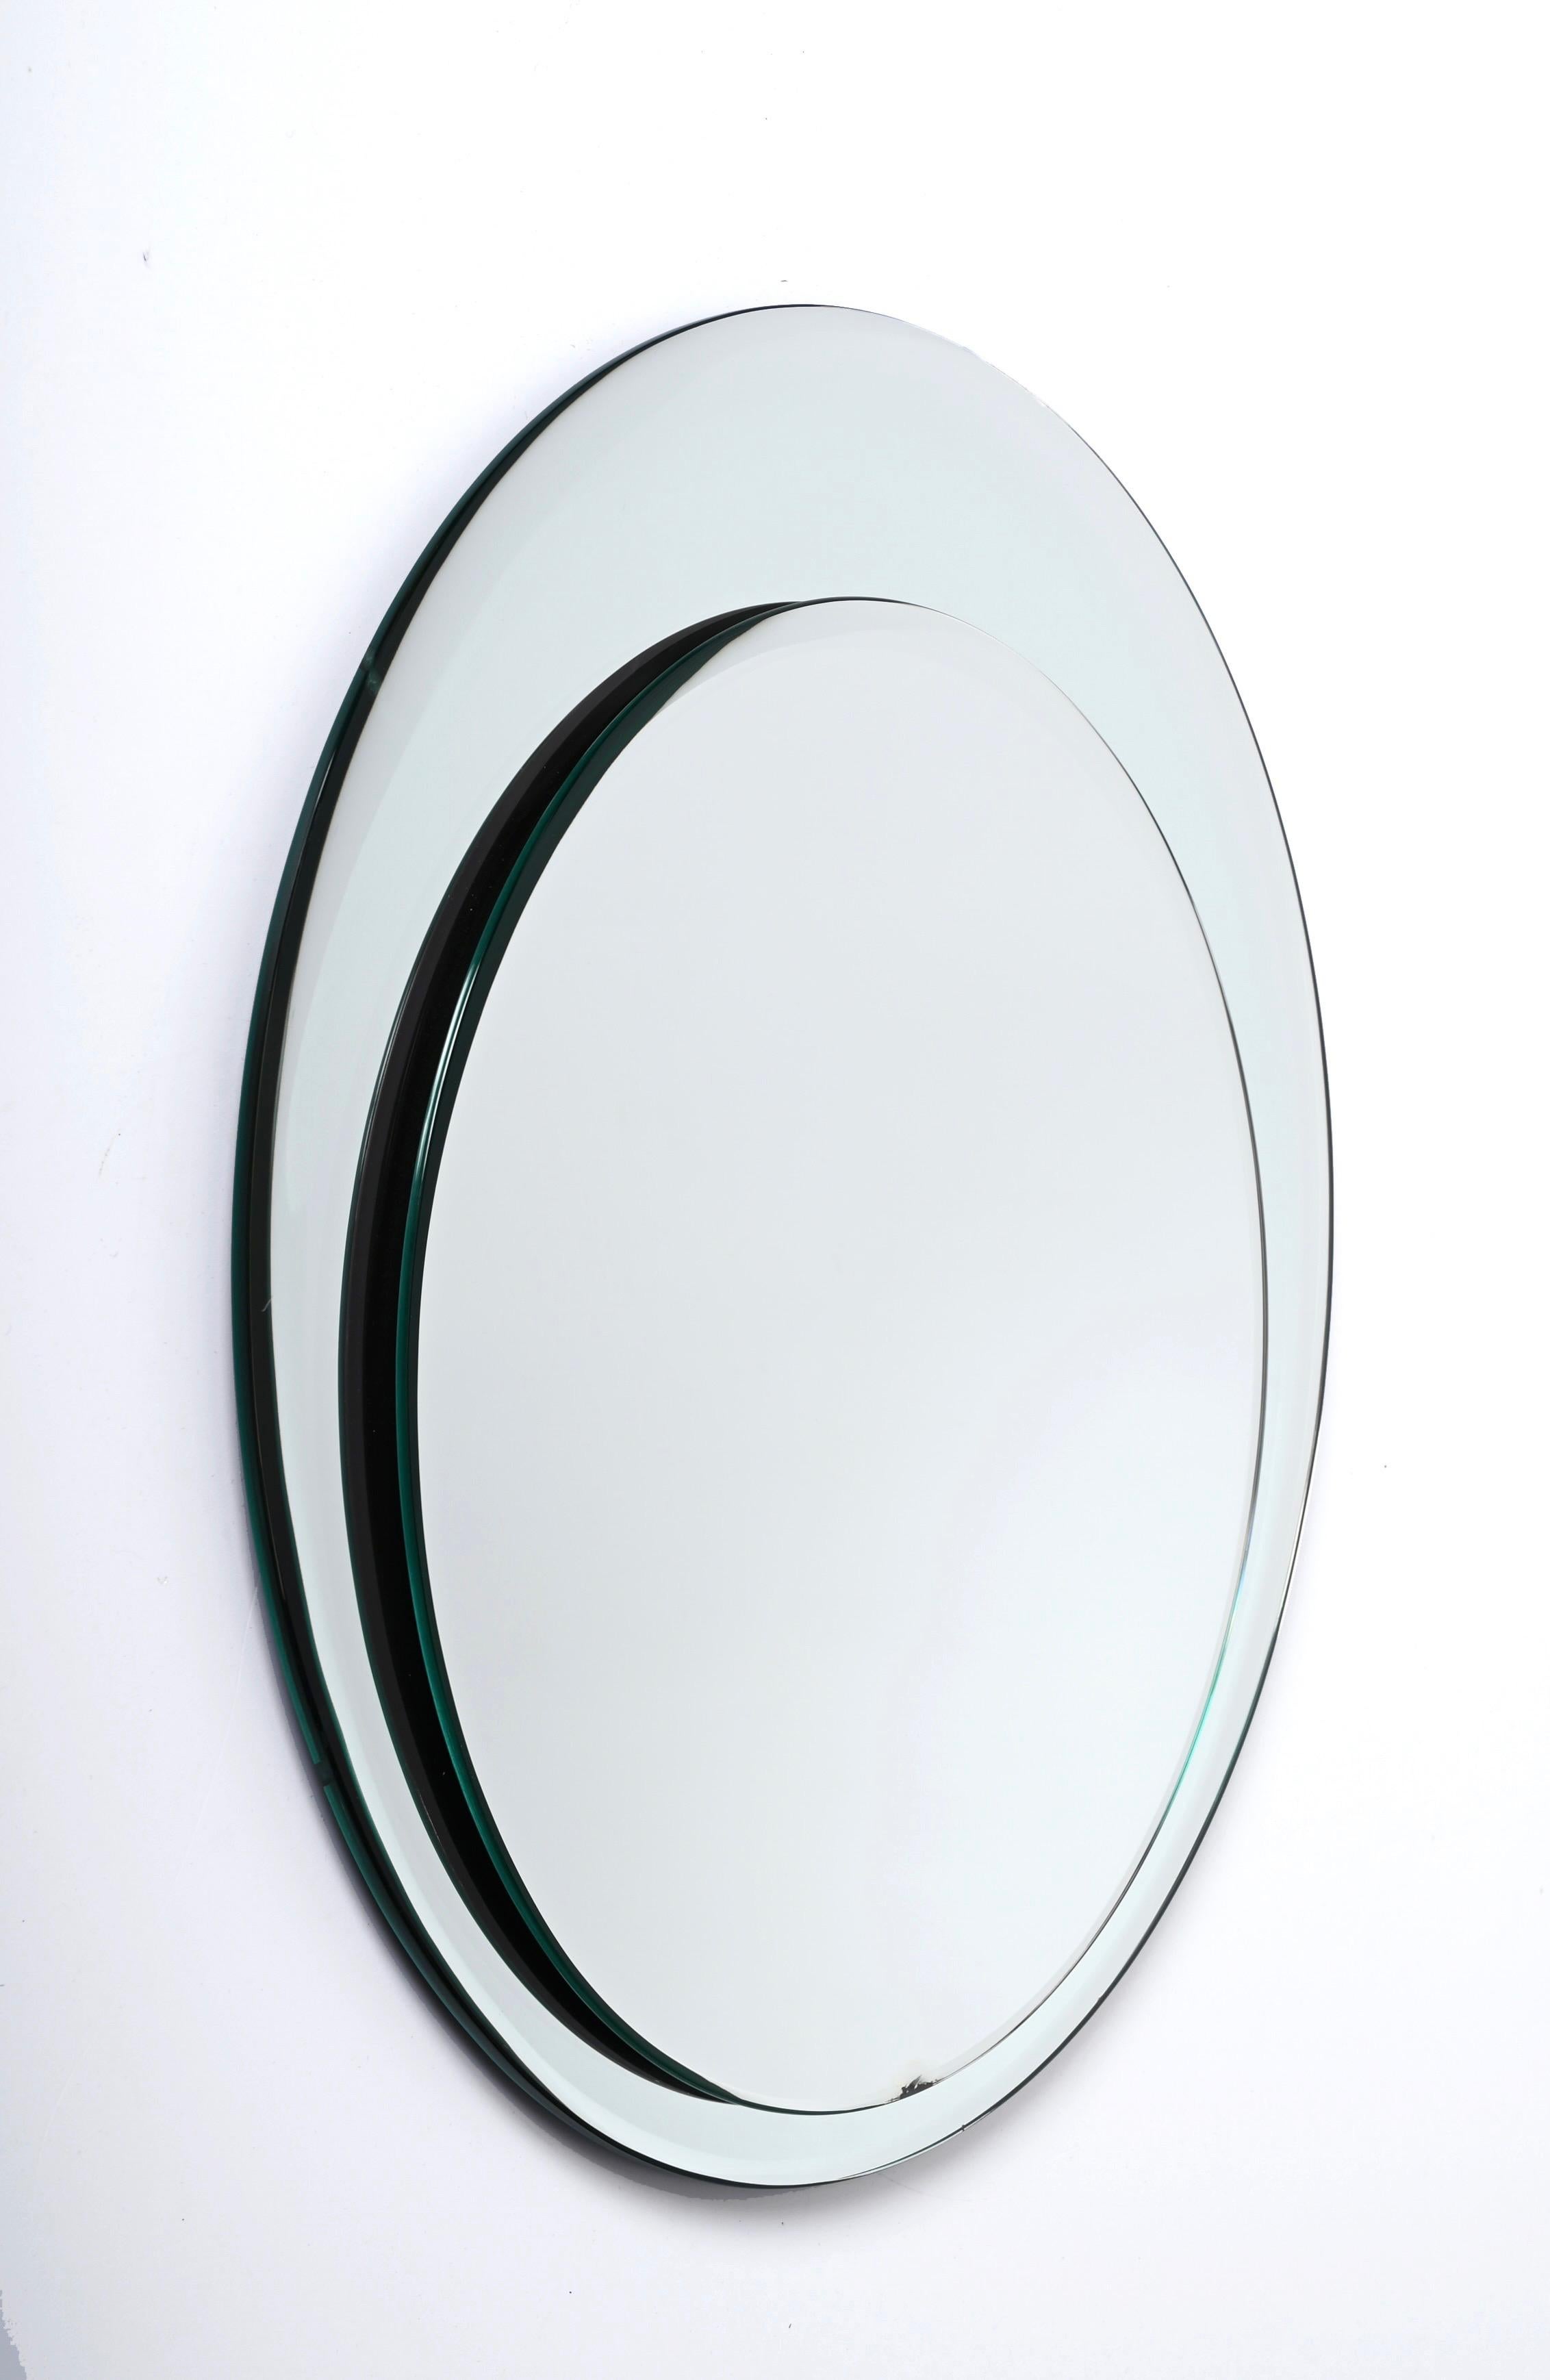 Midcentury Round Double Bevelled Mirror, Cristal Art, Italy, 1960s For Sale 4